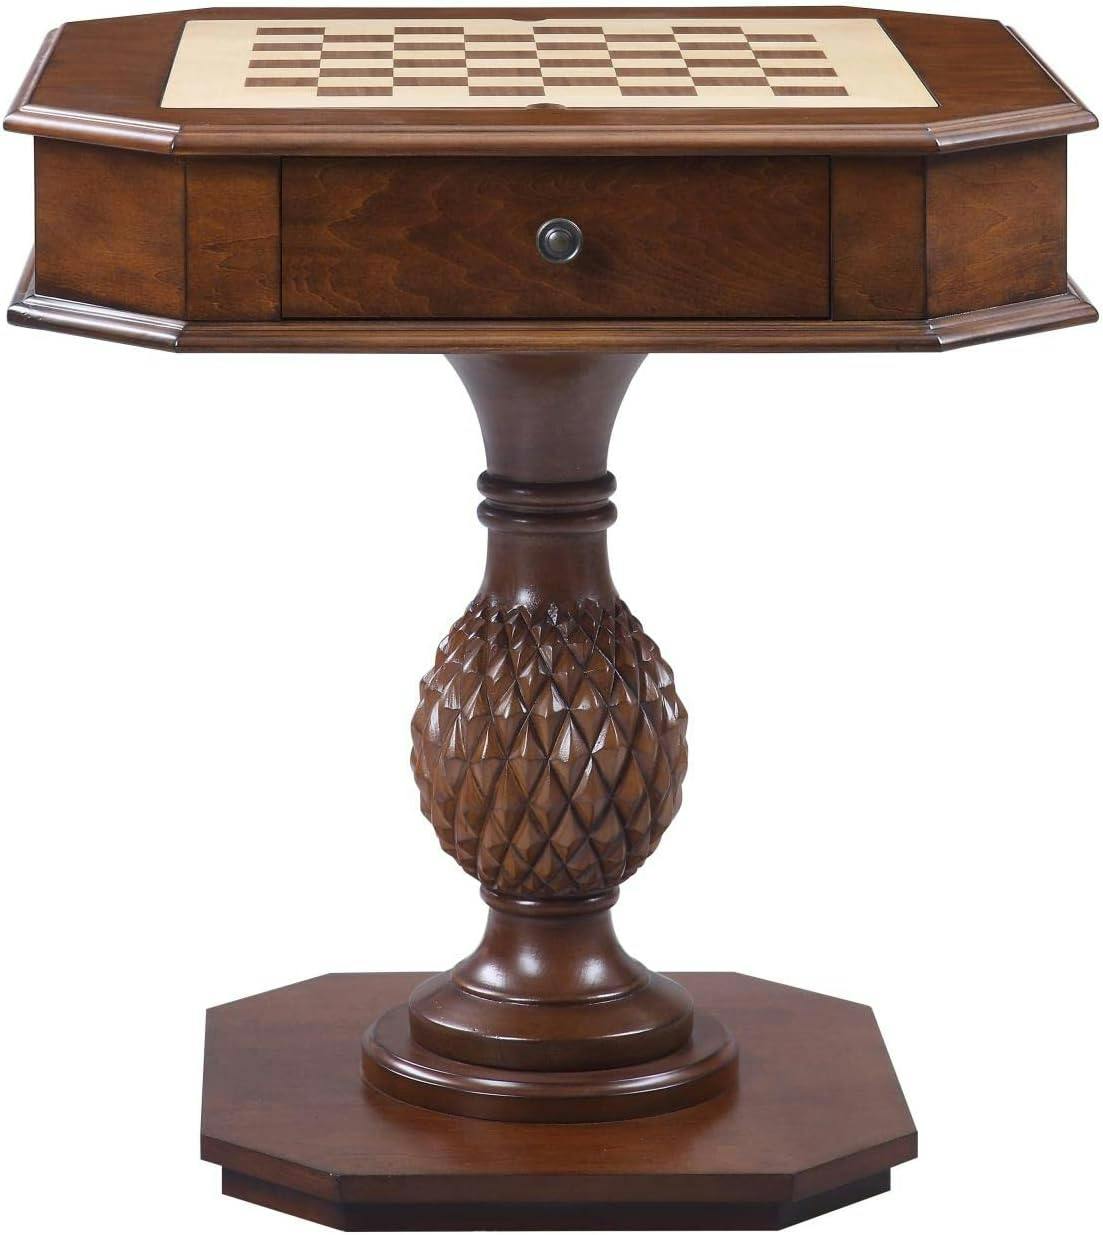 Heirloom Cherry Wood Game Table with Reversible Tray and Drawer